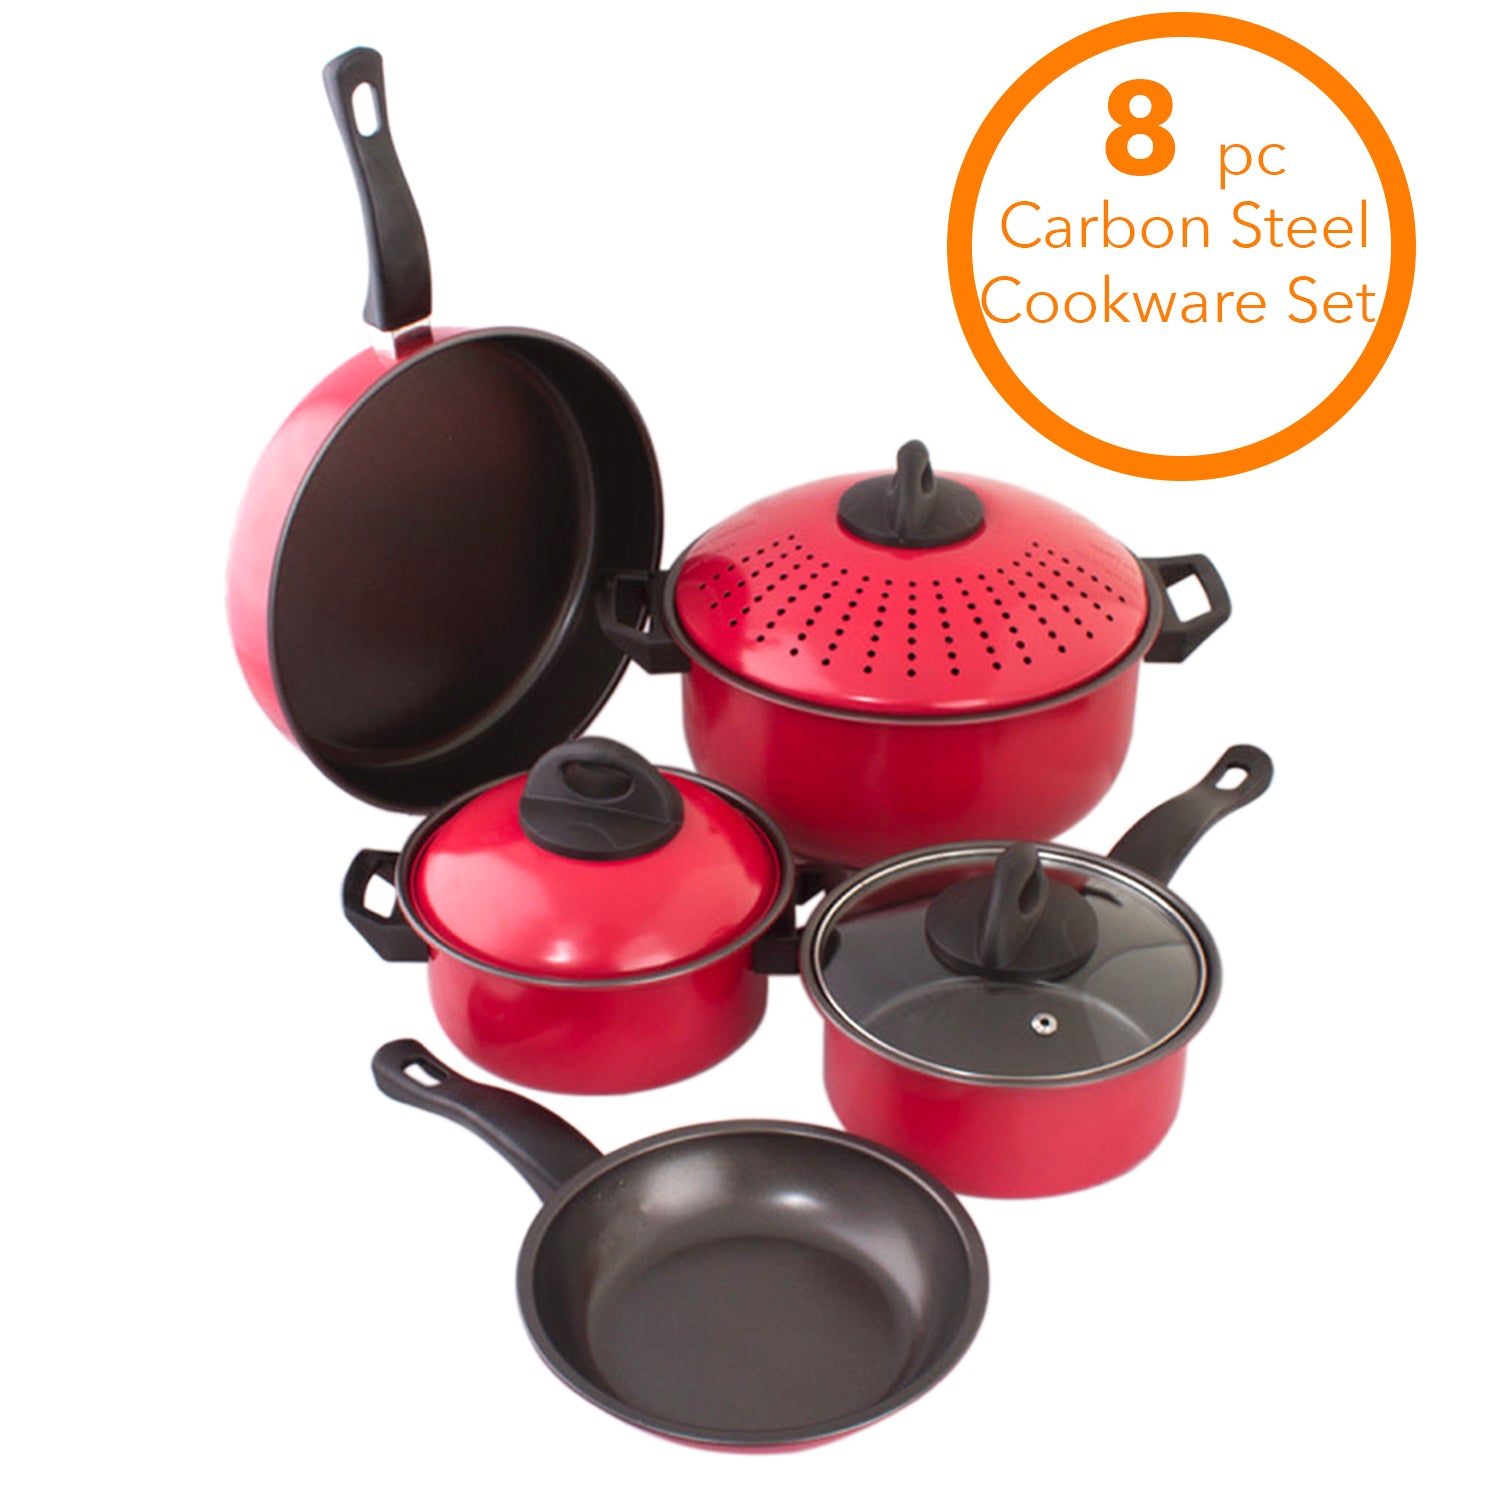 Cookware set Kitchen Pasta Pot With Strainer Lid Sauce Frying Pan 8 pcs. Set Red